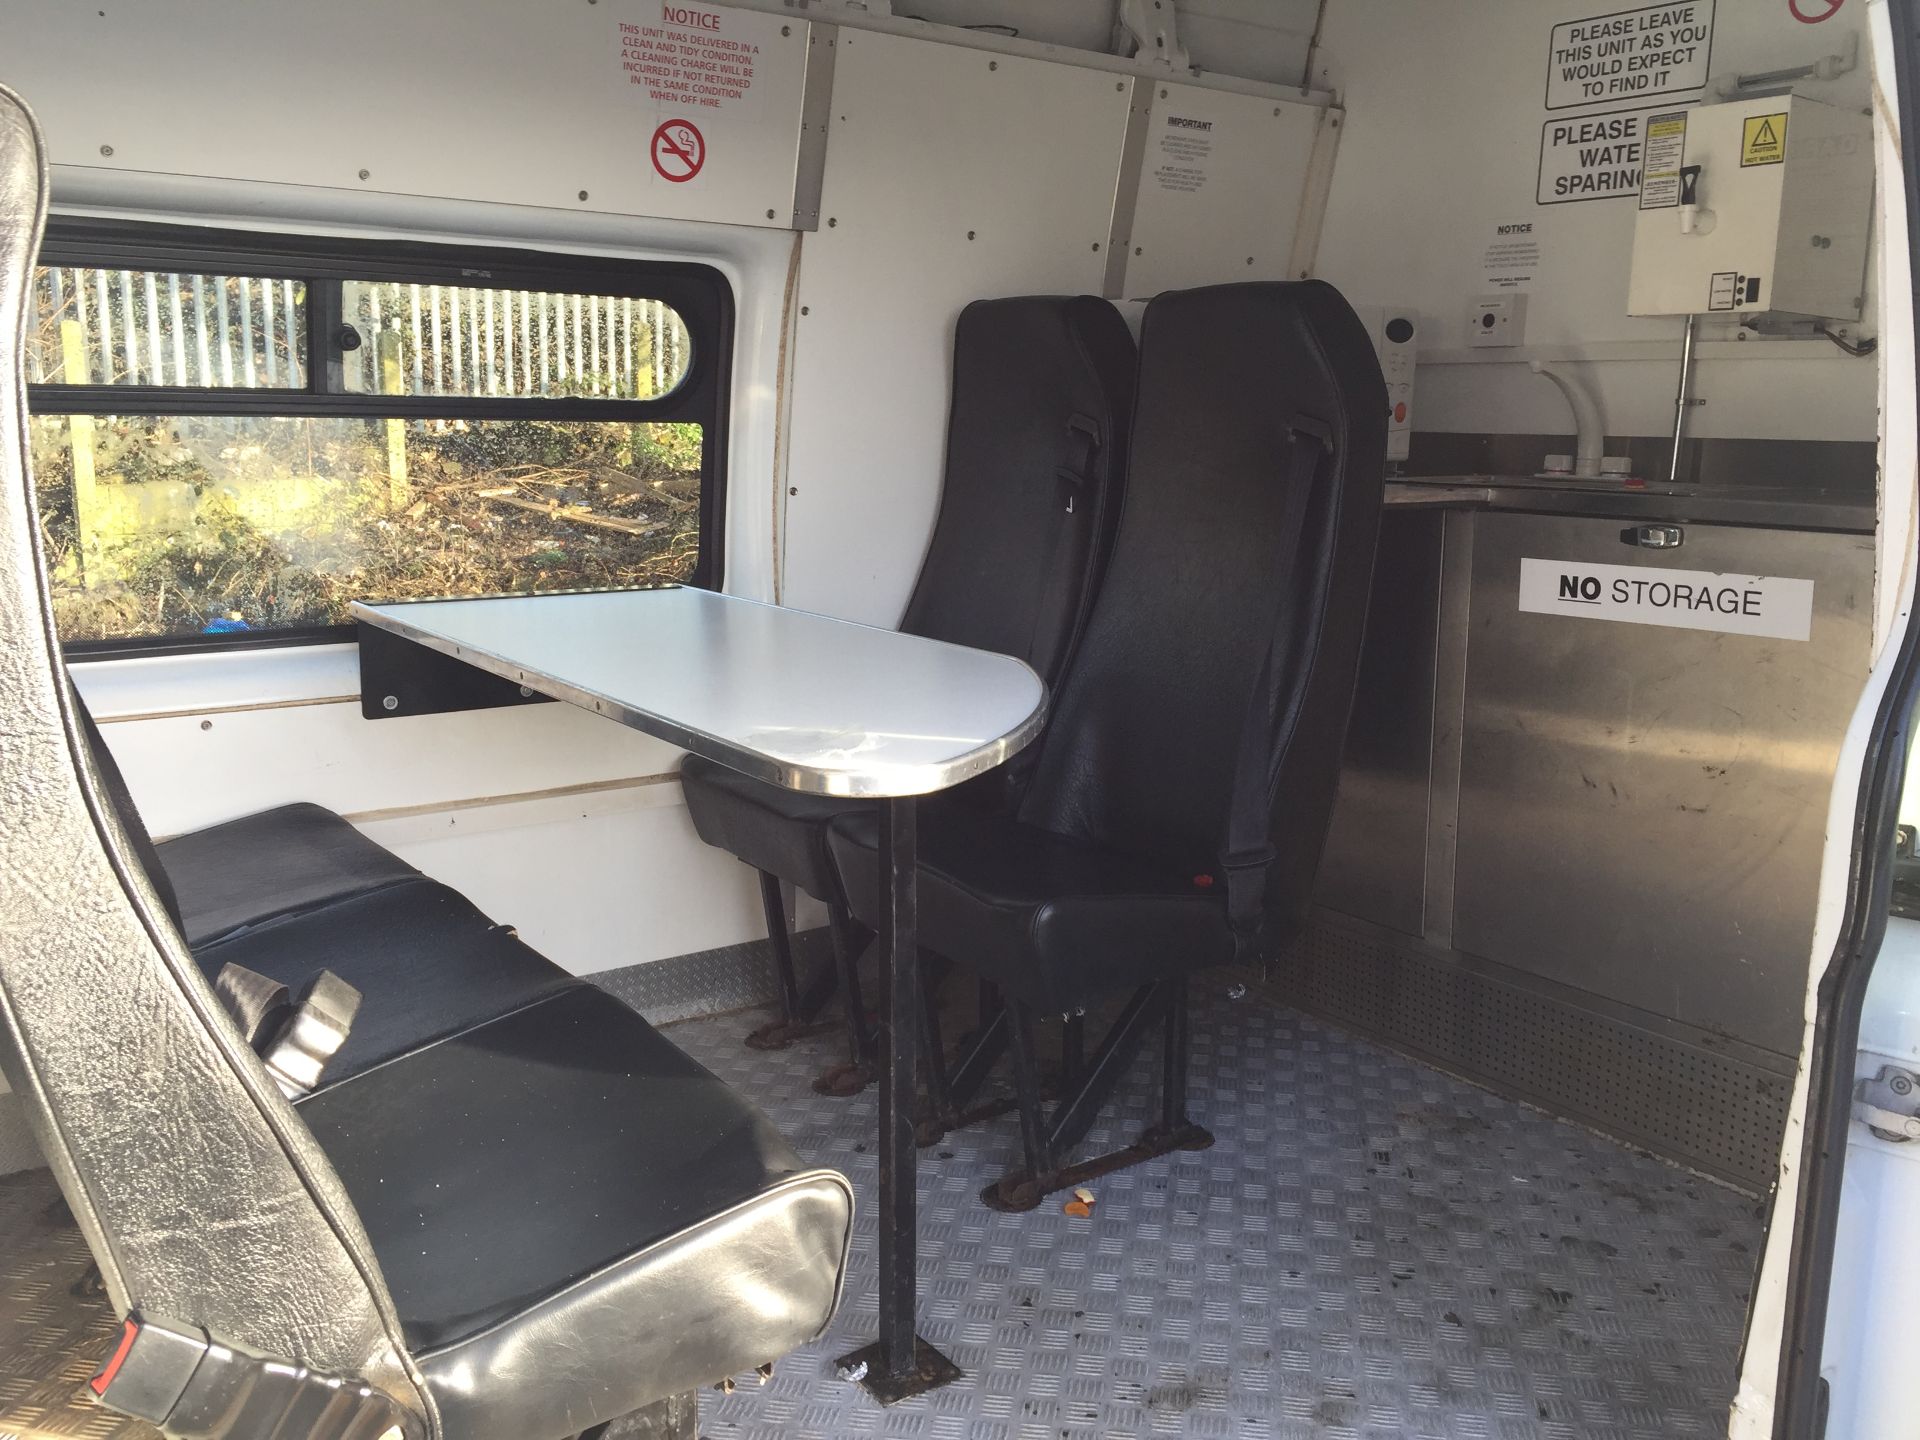 Ford Transit Welfare Van With Seating Area, Cooking Station and Toilet Ex-Commisioned Highway Mainte - Image 9 of 10